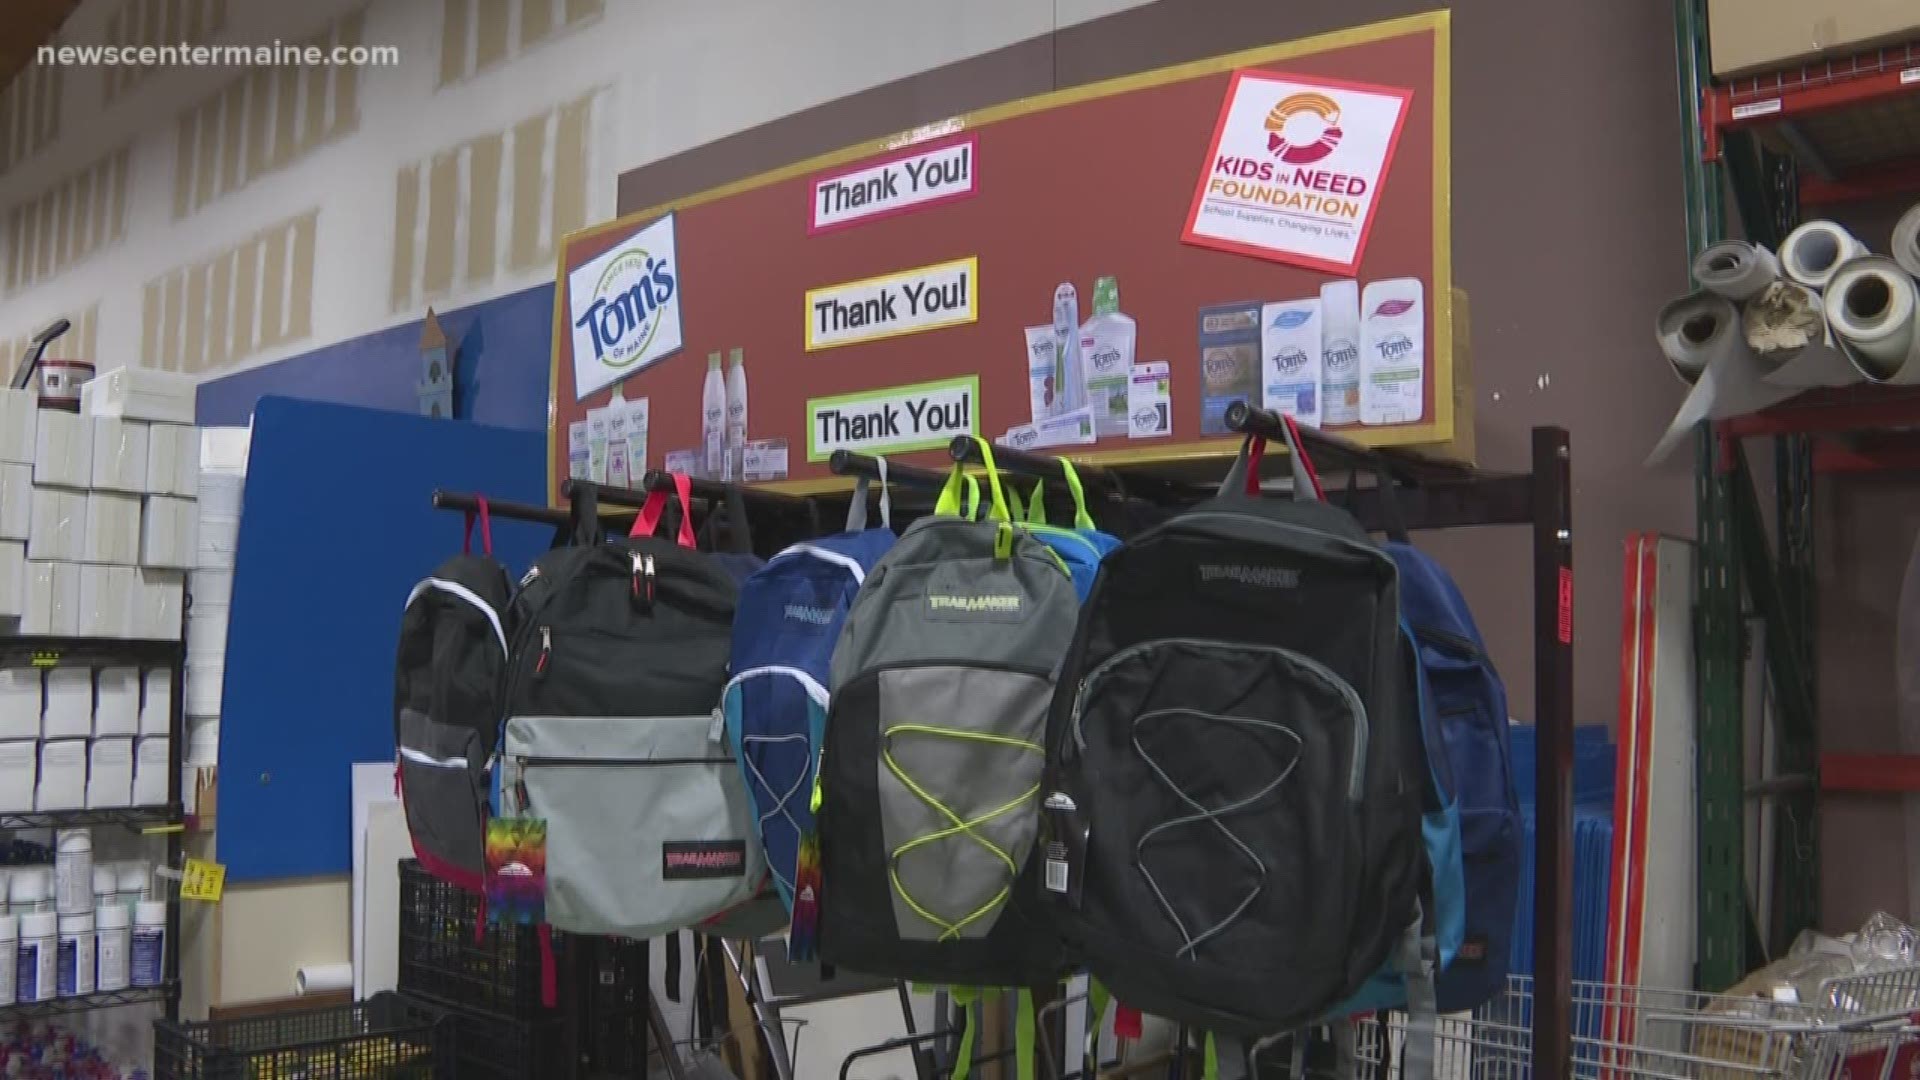 Toms of Maine donates one-thousand backpacks